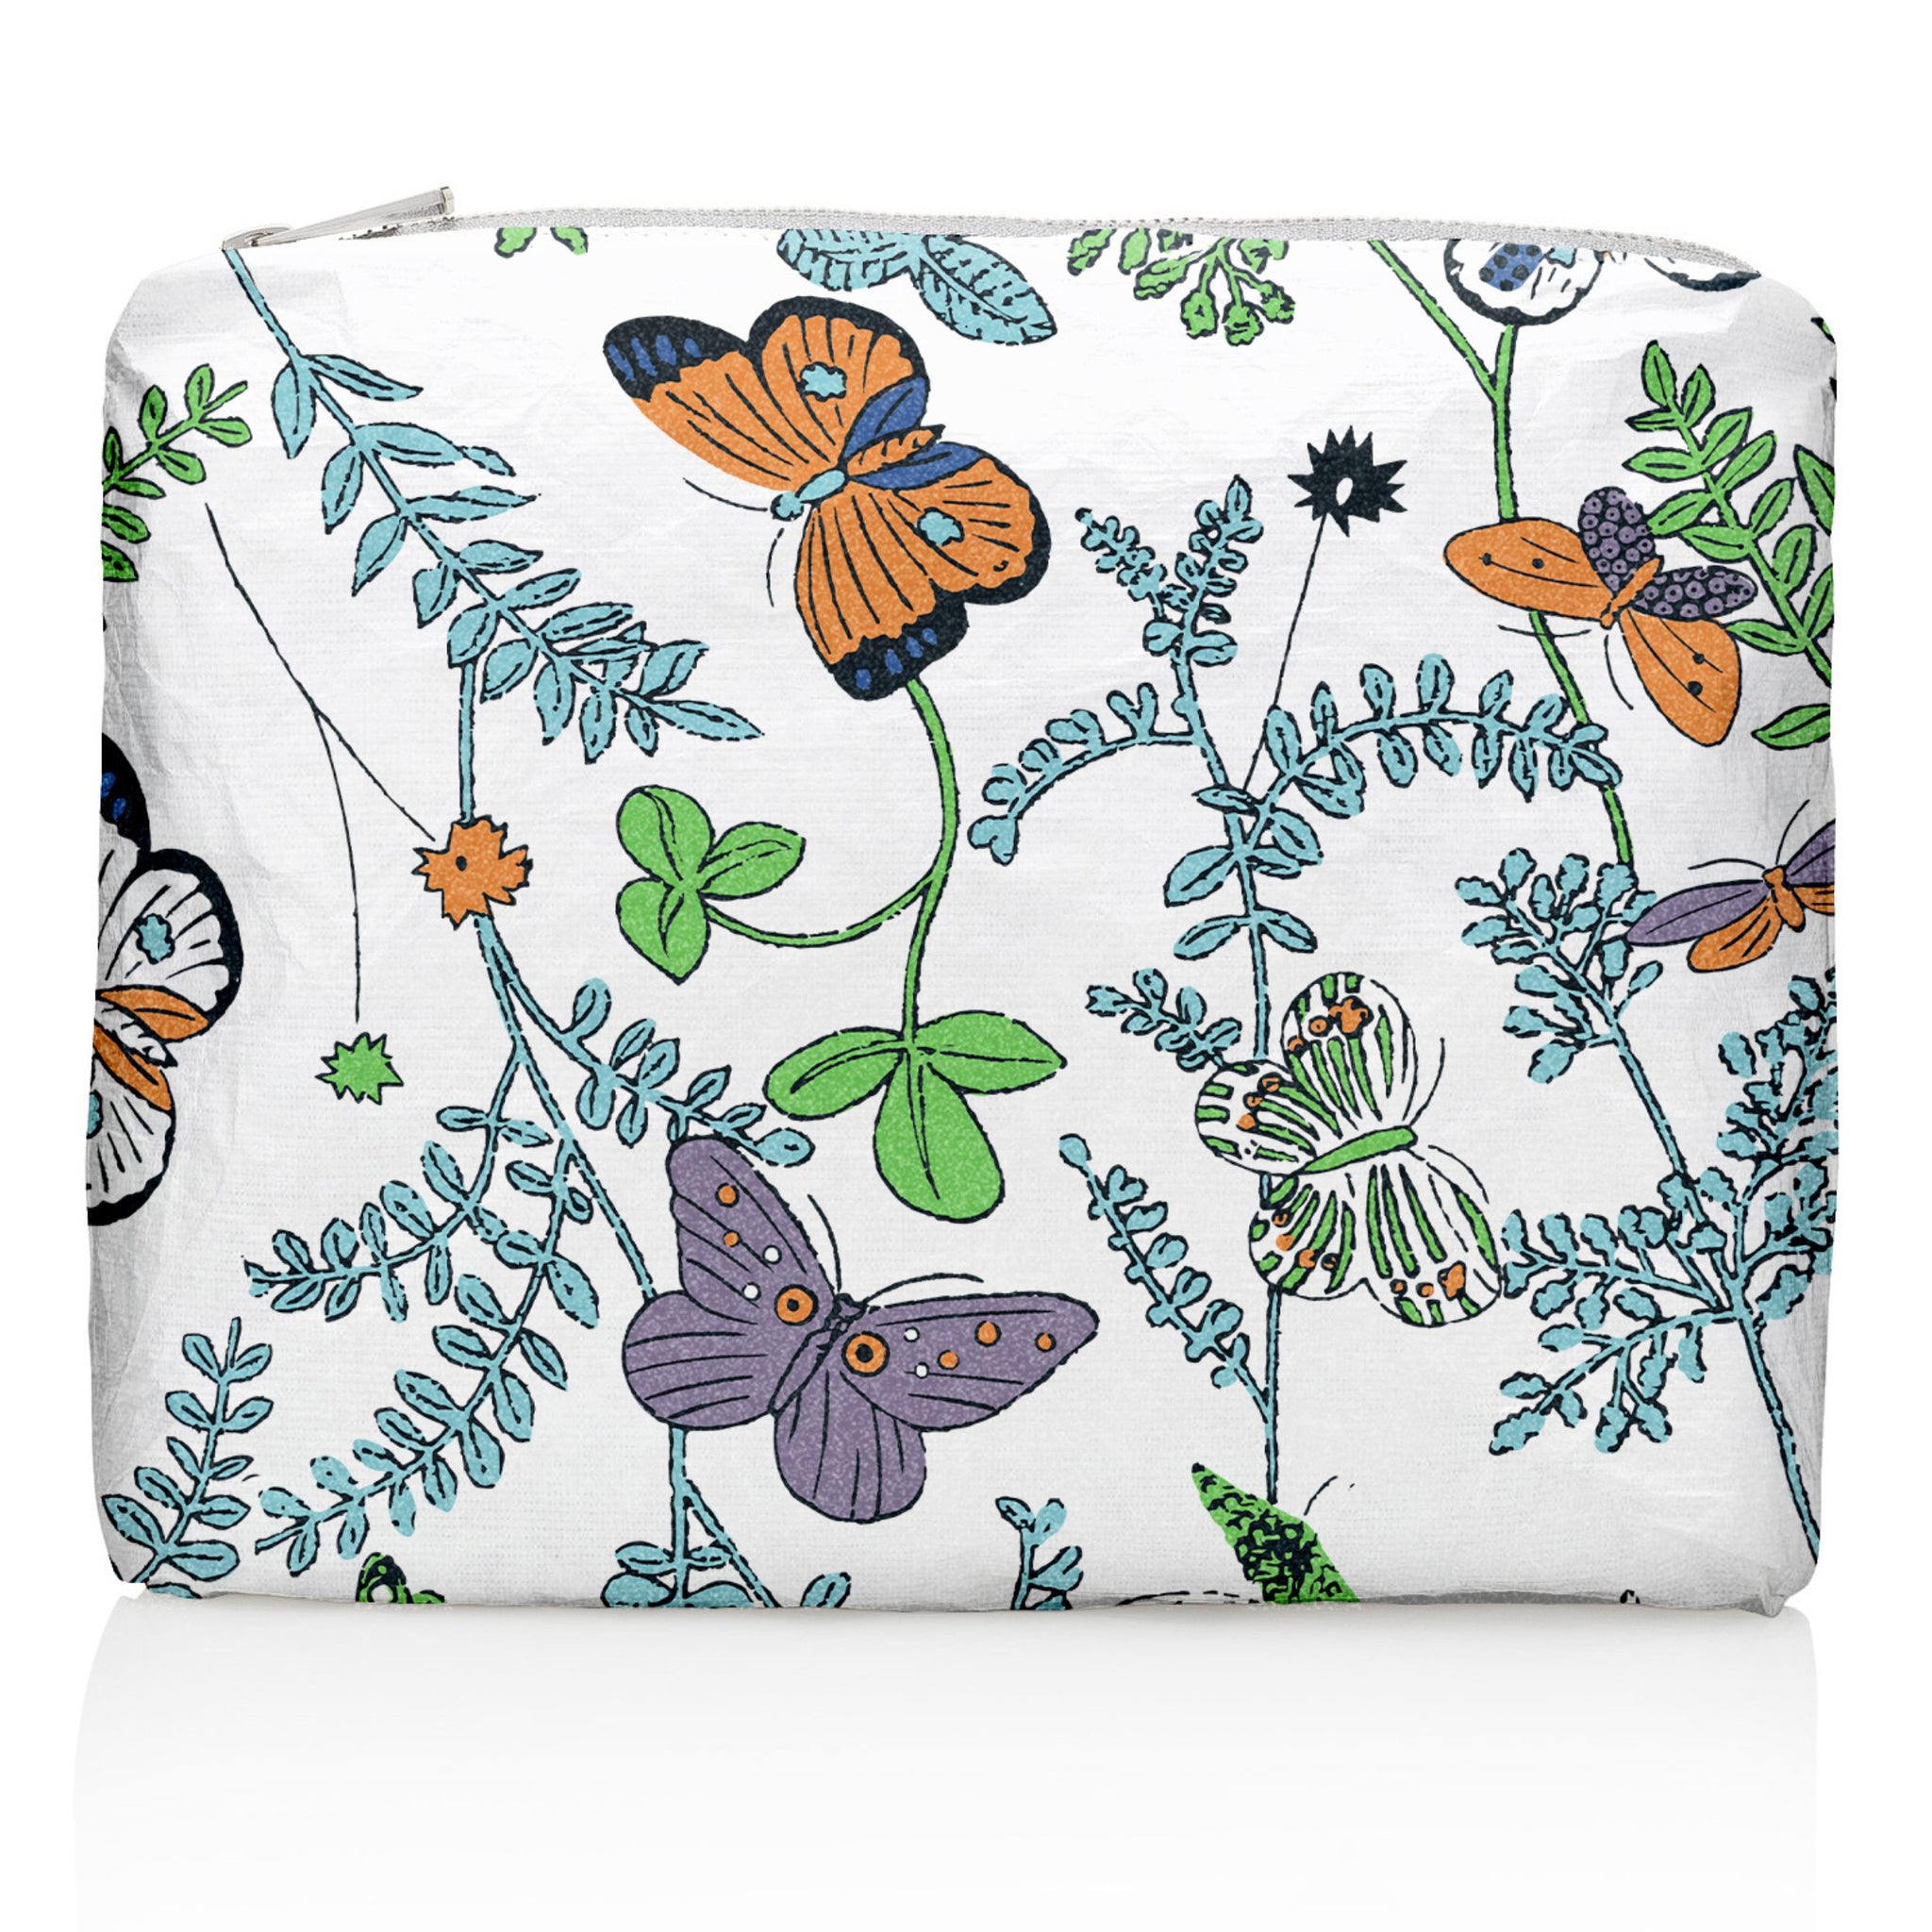 Butterfly Zippered Checkbook Cover